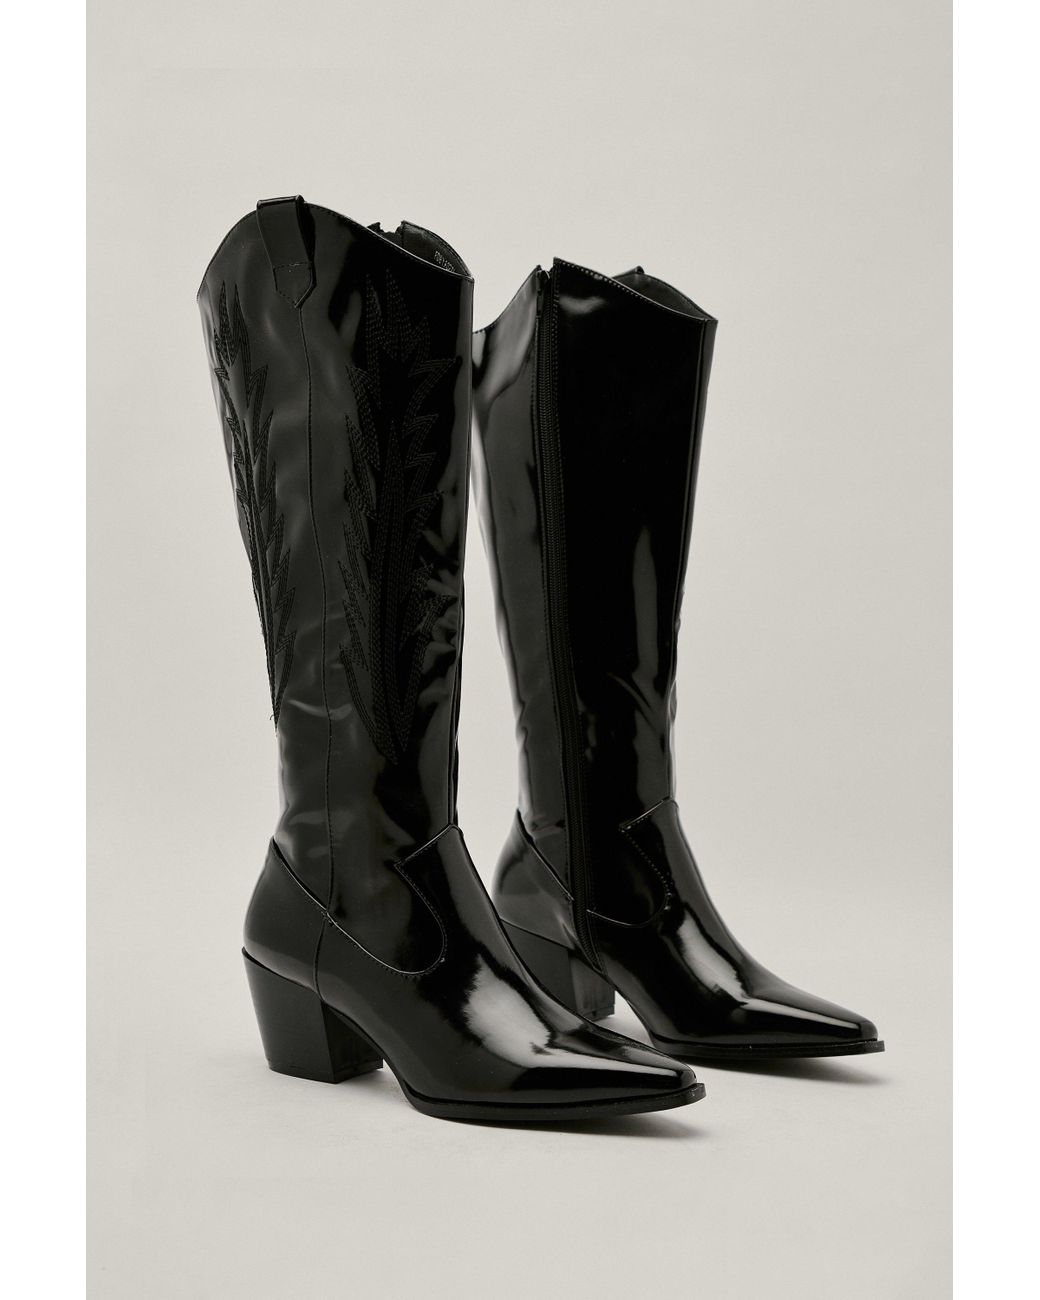 Nasty Gal Faux Leather Knee High Cowboy Boots in Black | Lyst